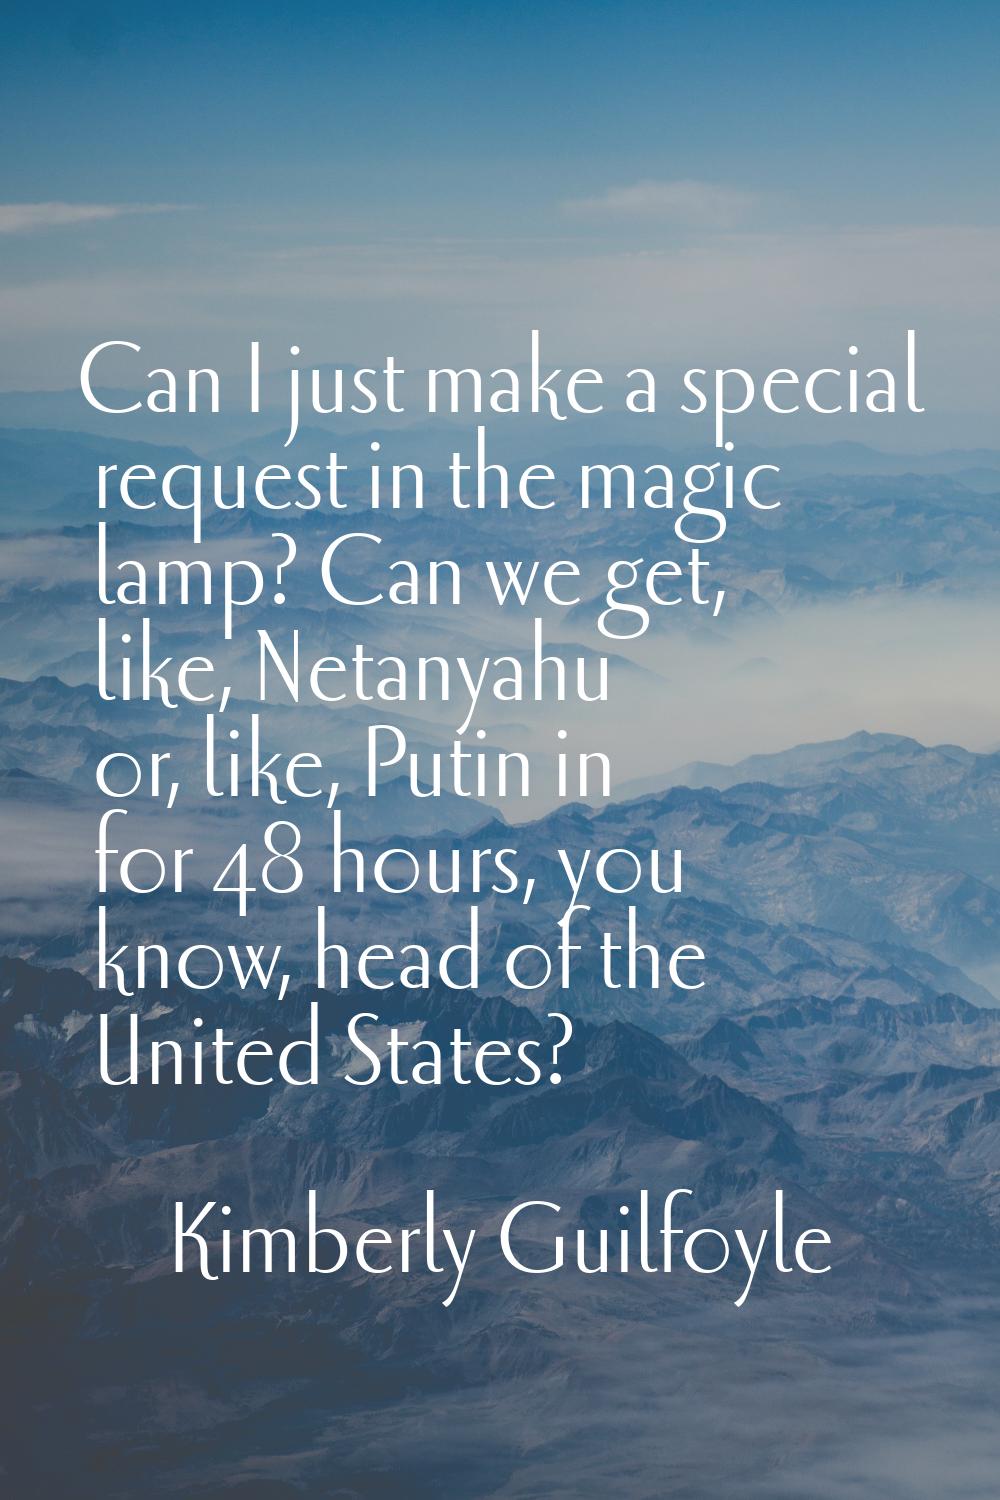 Can I just make a special request in the magic lamp? Can we get, like, Netanyahu or, like, Putin in